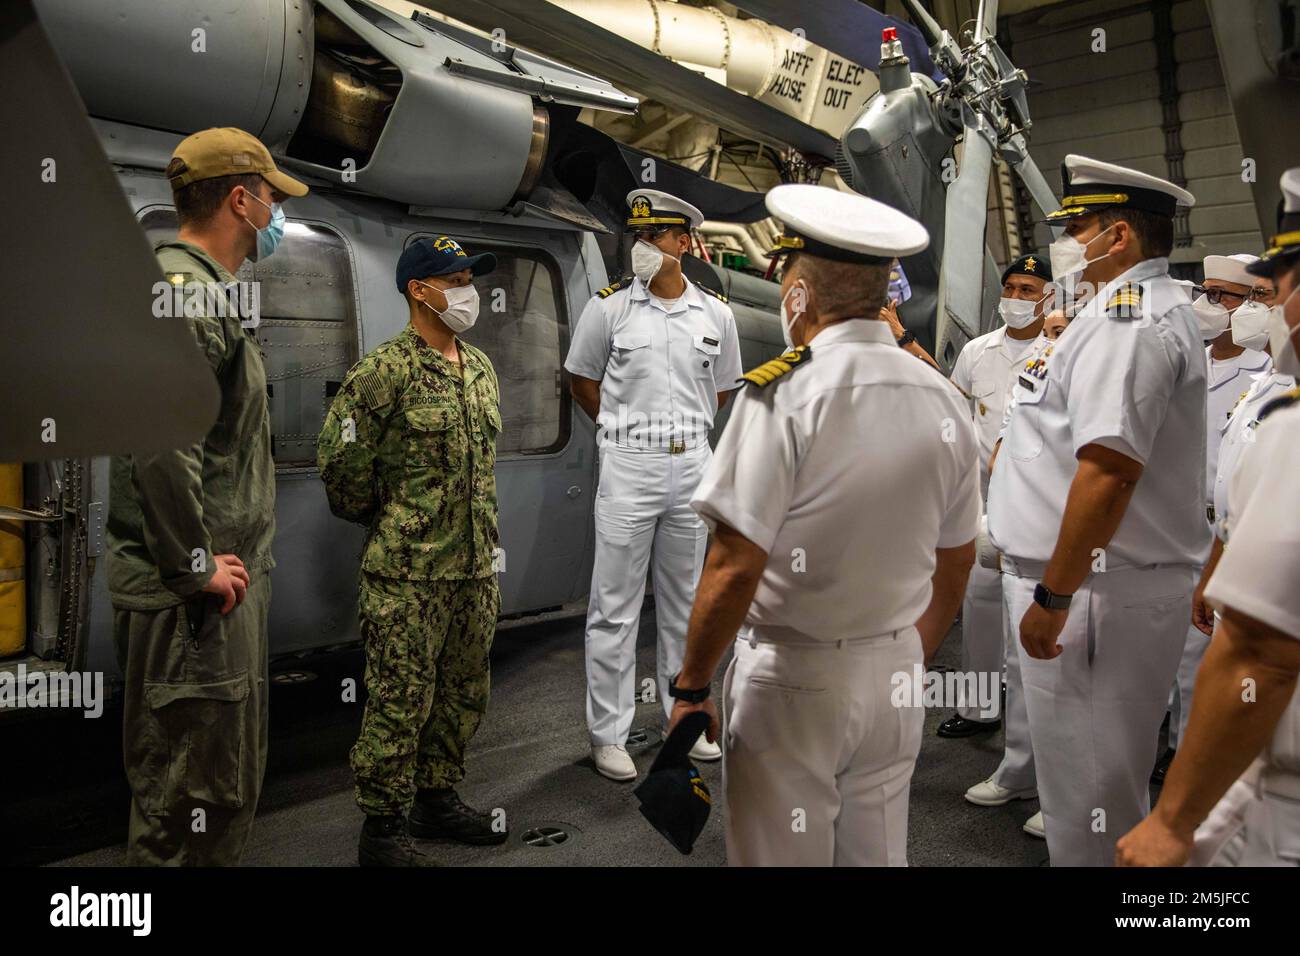 220319-N-HD110-1044  MANTA, Ecuador - (March 19, 2022) -- Aviation Machinist’s Mate 3rd Class Felix Ricoospina, middle, assigned to the “Sea Knights” of Helicopter Sea Combat (HSC) Squadron 22, Detachment 5, discusses the capabilities of the MH-60S Sea Hawk helicopter to Ecuadorian navy sailors during their visit to the Freedom-variant littoral combat ship USS Milwaukee (LCS 5), March 19, 2022. Milwaukee is deployed to the U.S. 4th Fleet area of operations to support Joint Interagency Task Force South’s mission, which includes counter-illicit drug trafficking missions in the Caribbean and East Stock Photo